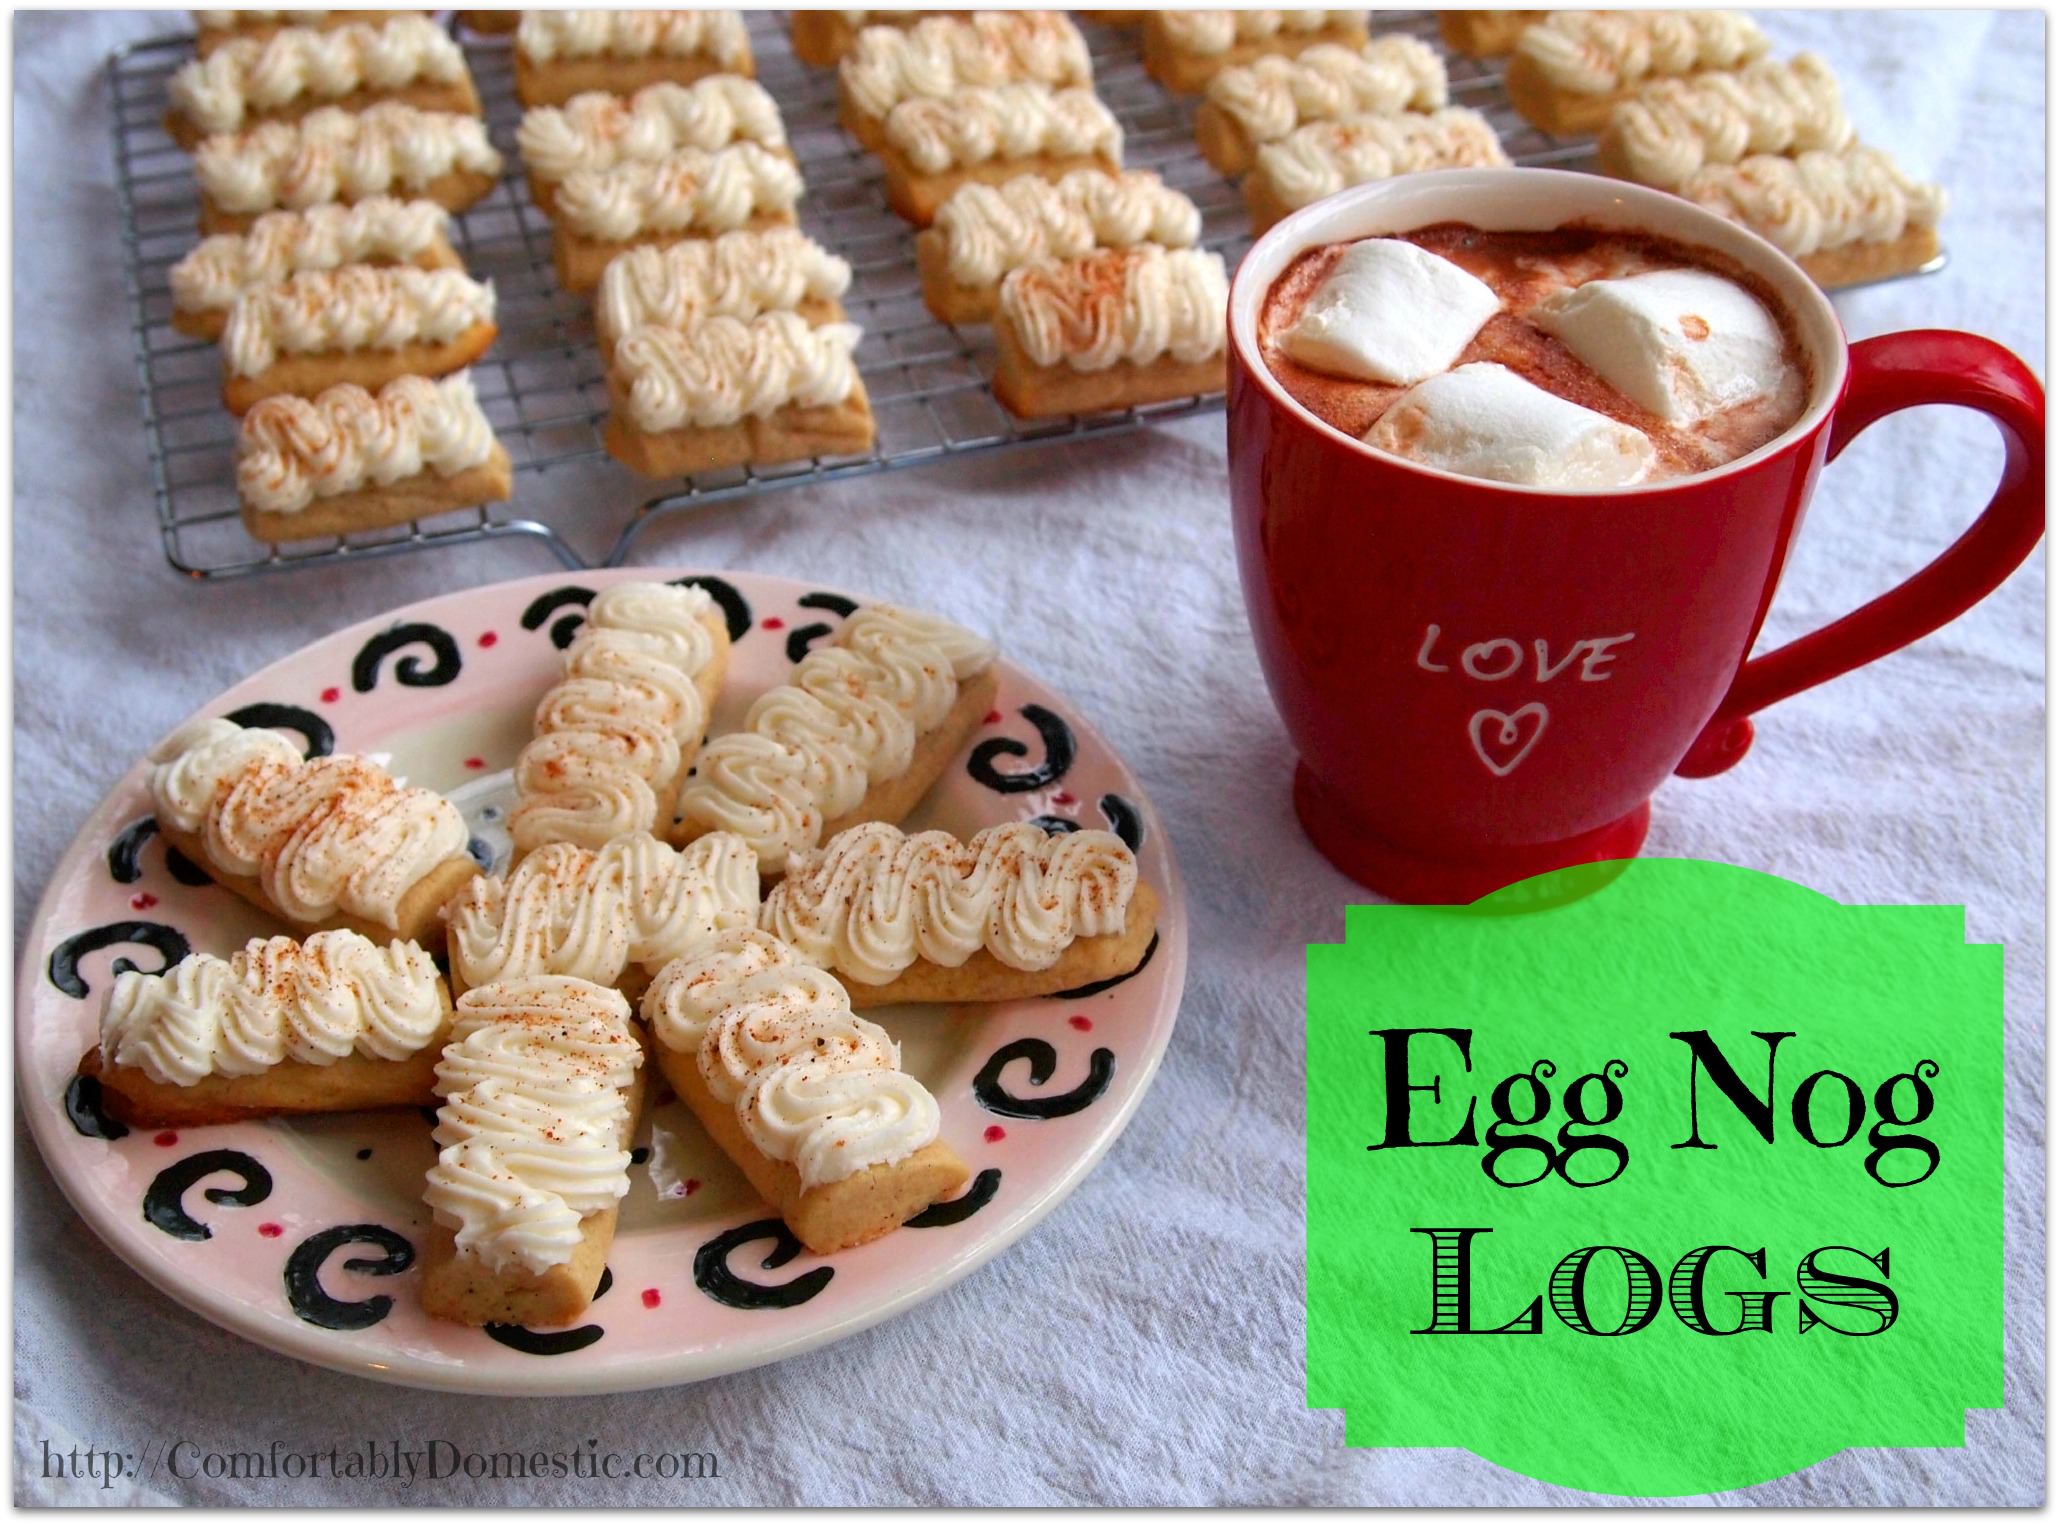 Egg Nog Logs by Comfortably Domestic